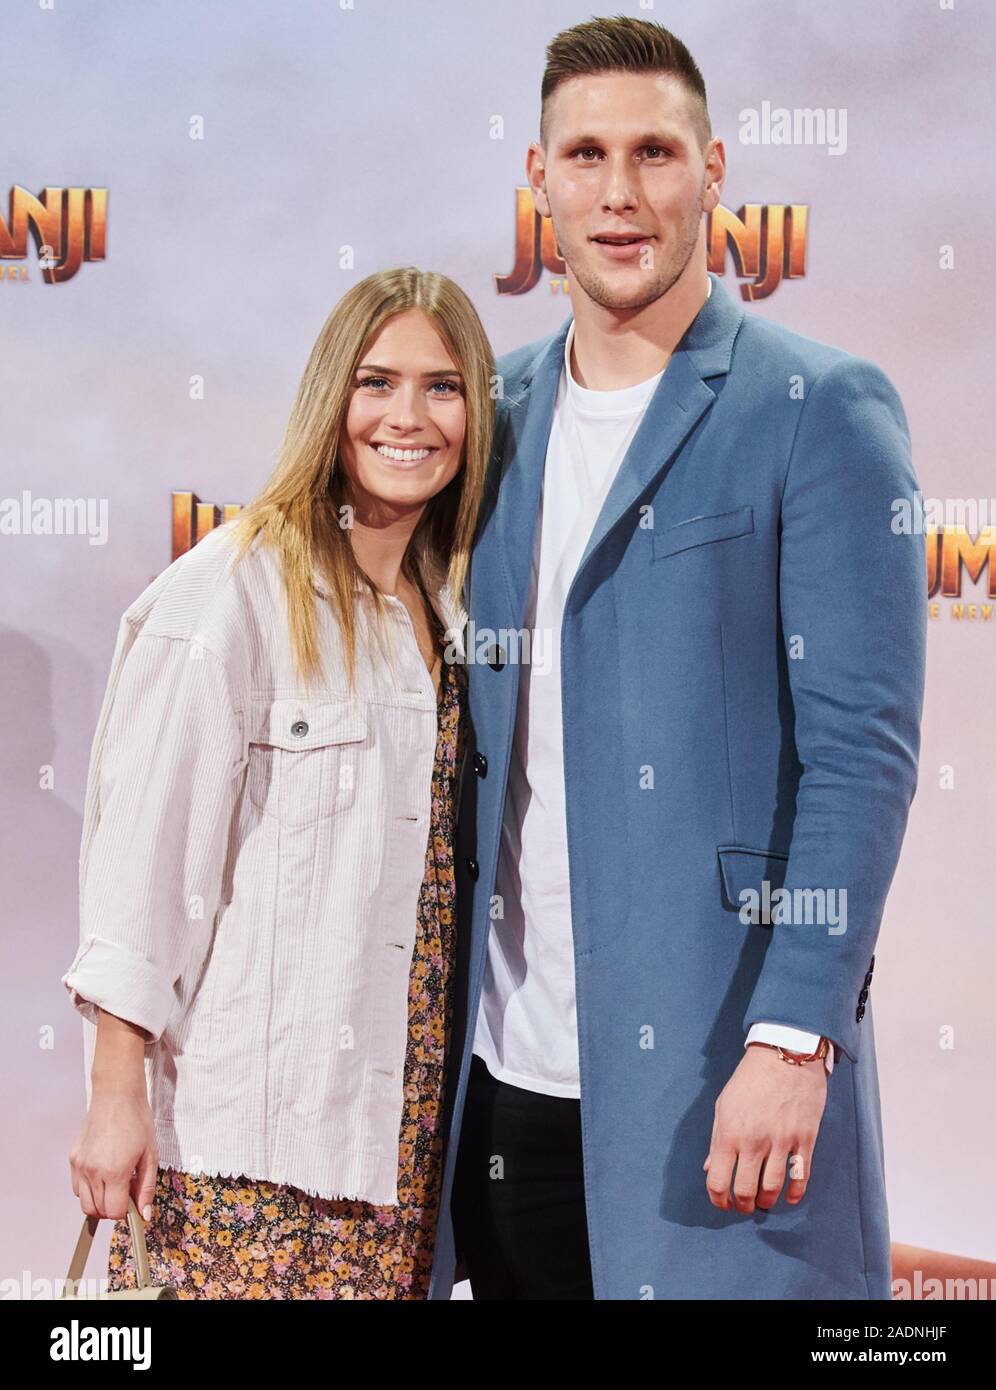 Berlin, Germany. 04th Dec, 2019. Professional soccer player Niklas Süle  from Bayern Munich comes with his girlfriend Melissa Halter to the German  premiere of the film "Jumanji: The next Level". Cinema release